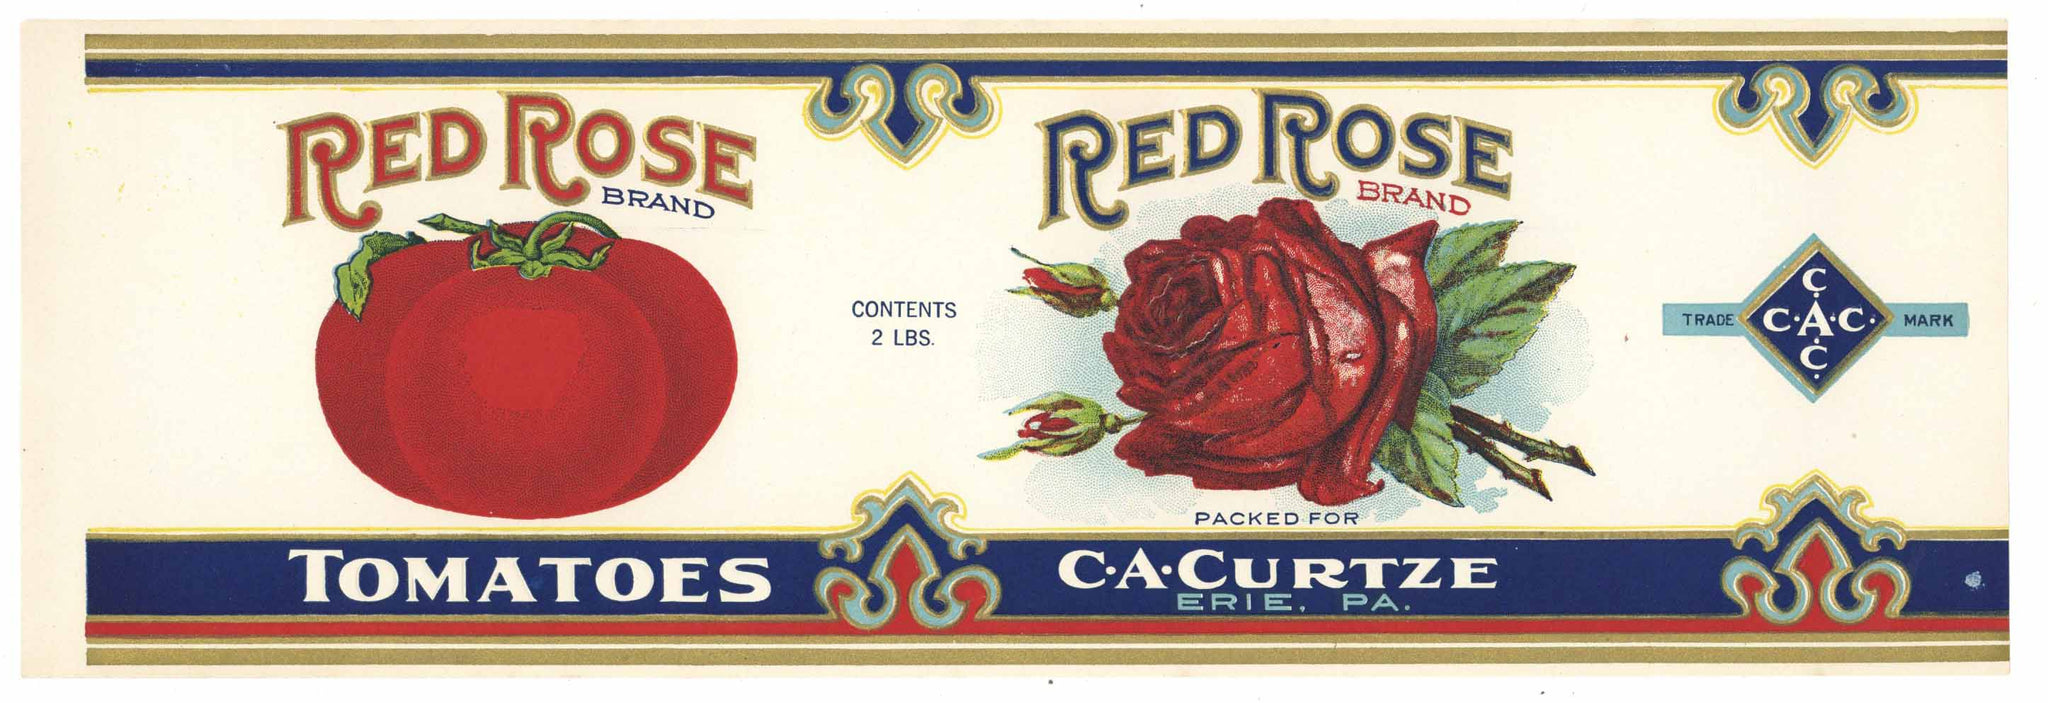 Red Rose Brand Vintage Erie Pennsylvania Tomato Can Label